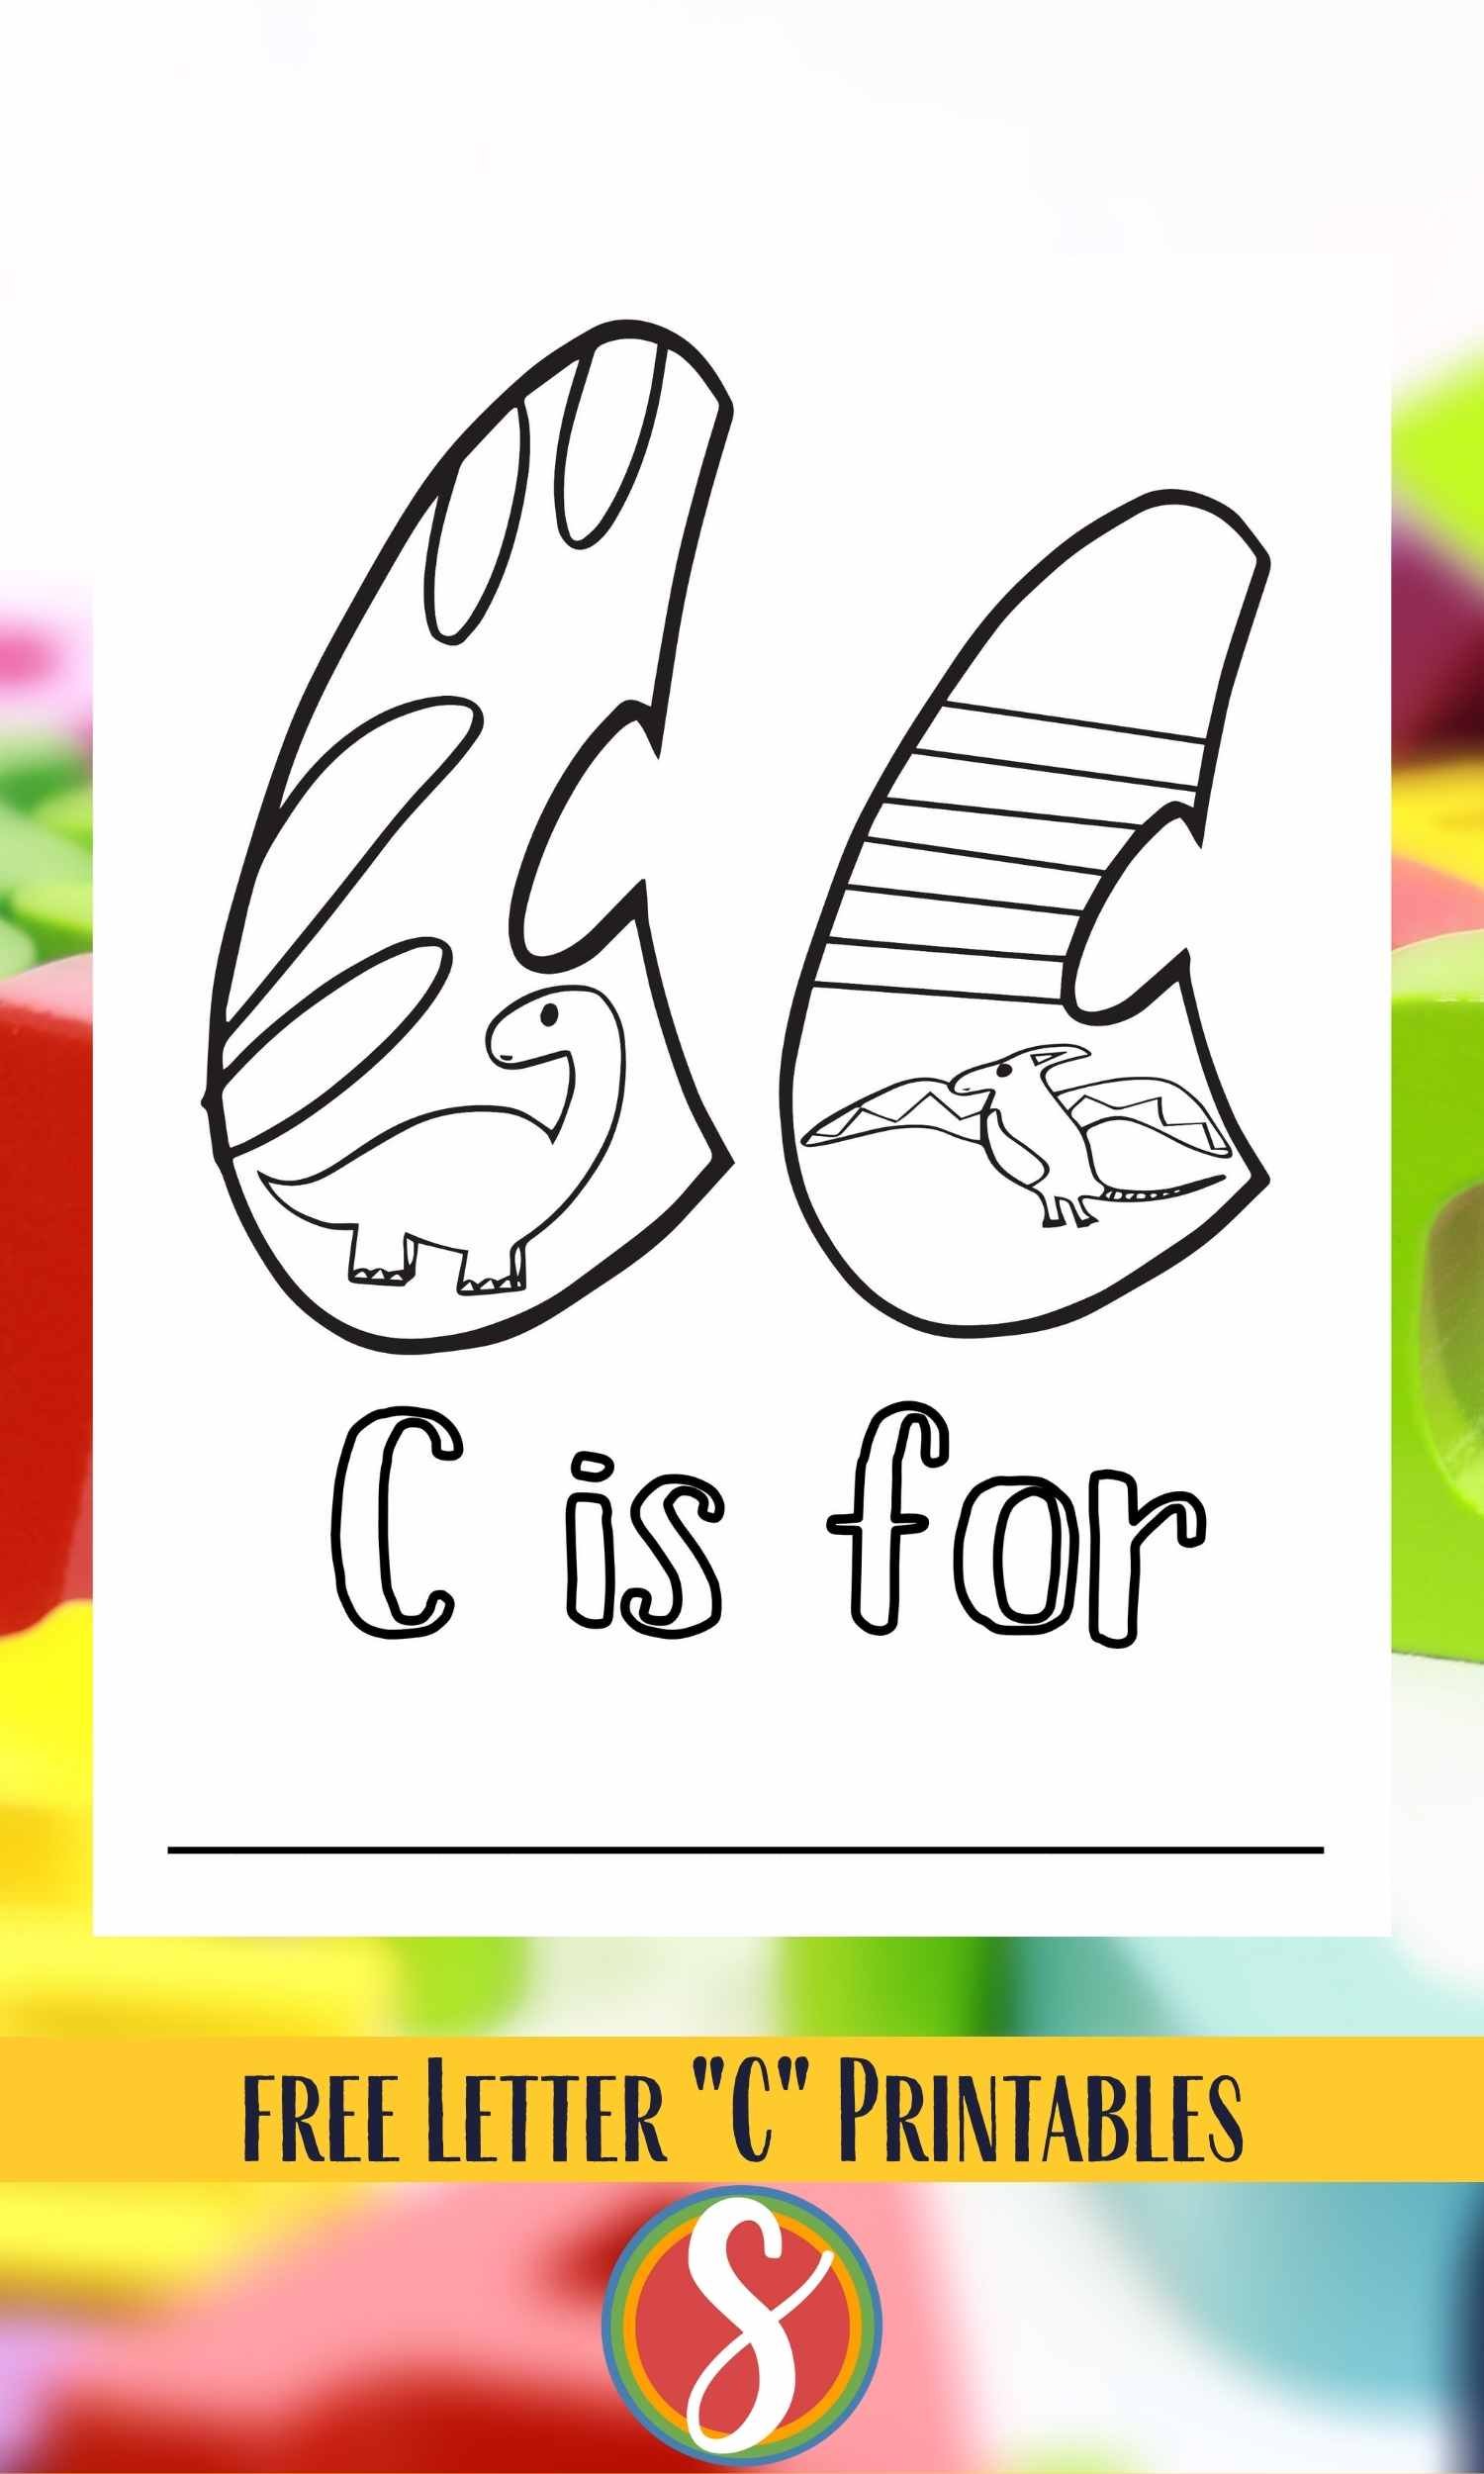 bubble letter c's, one big one little, with little simple dinosaurs drawn inside to color